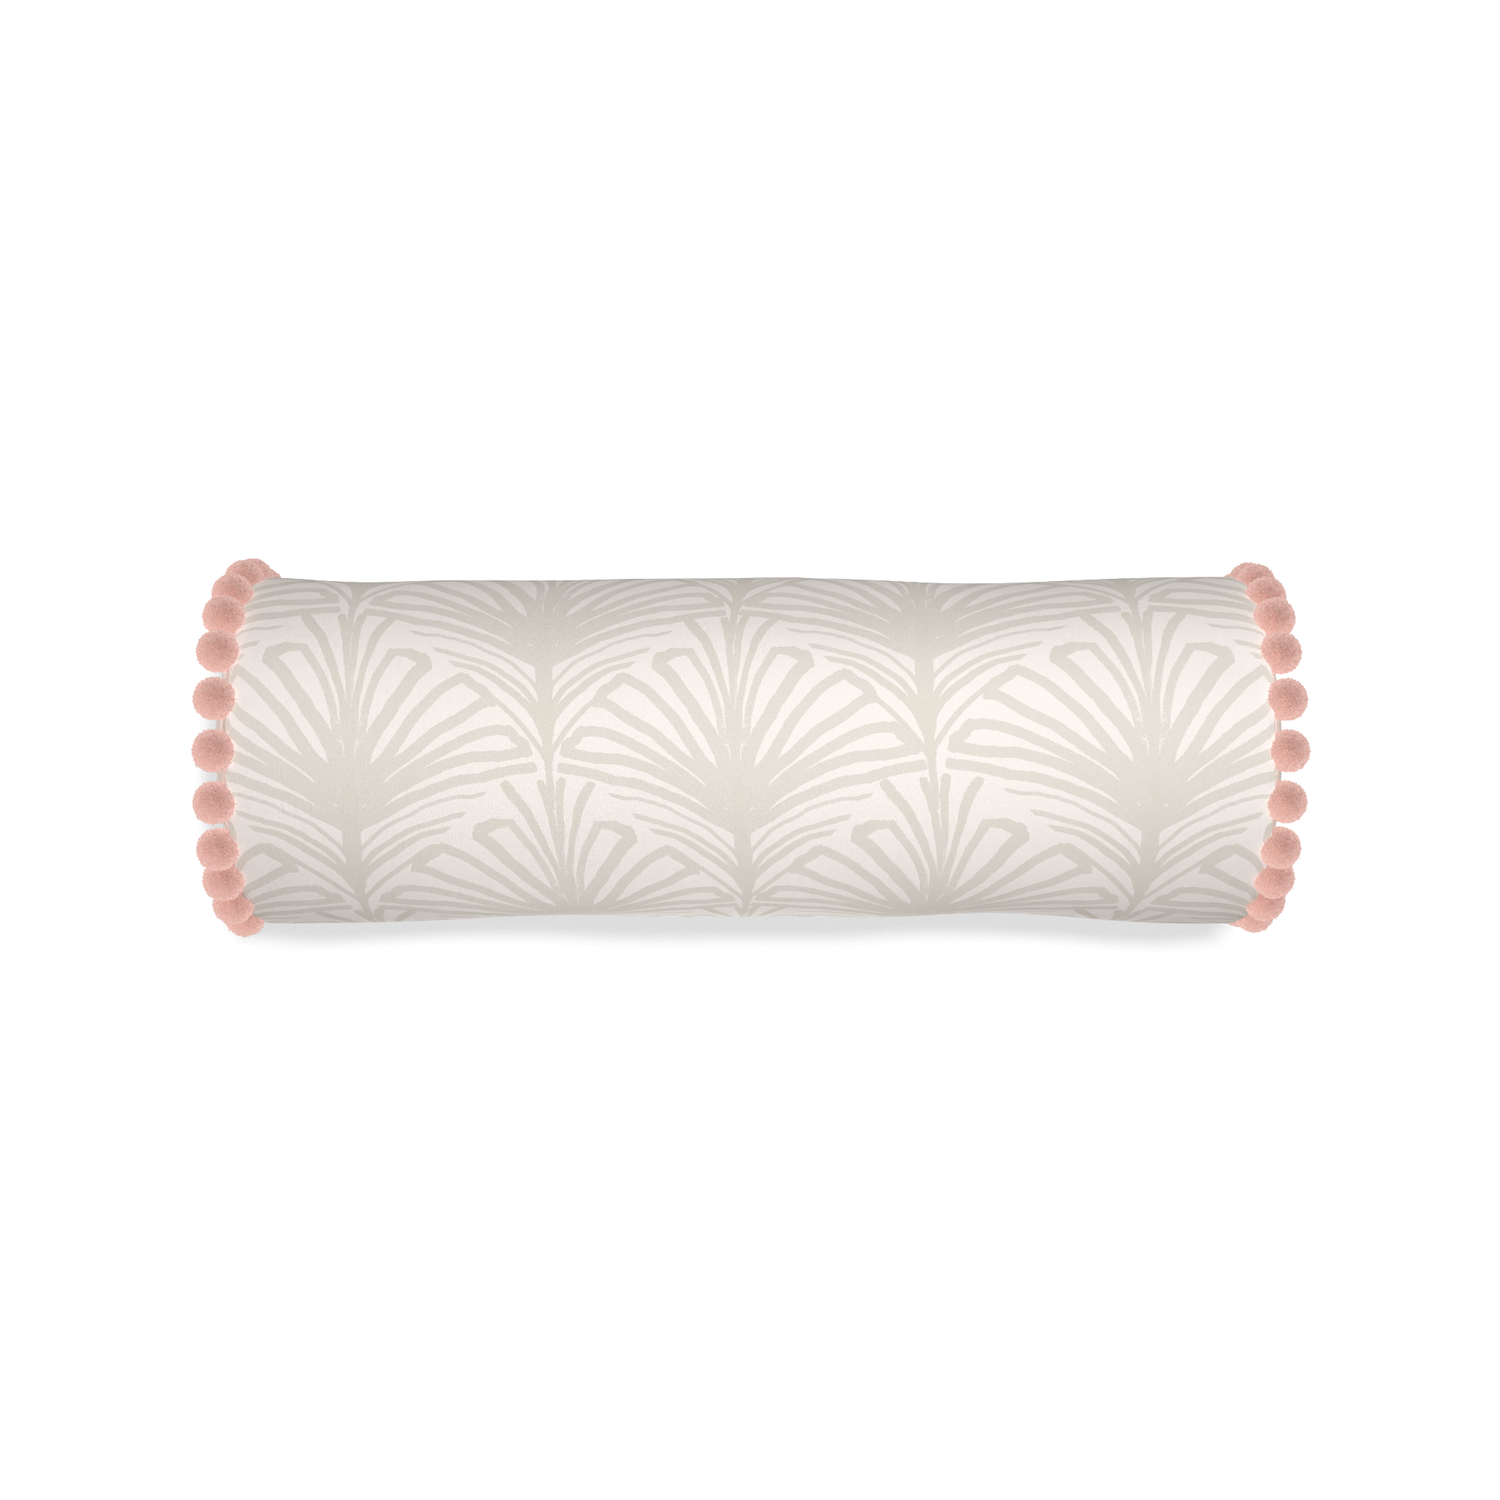 Bolster suzy sand custom beige palmpillow with rose pom pom on white background